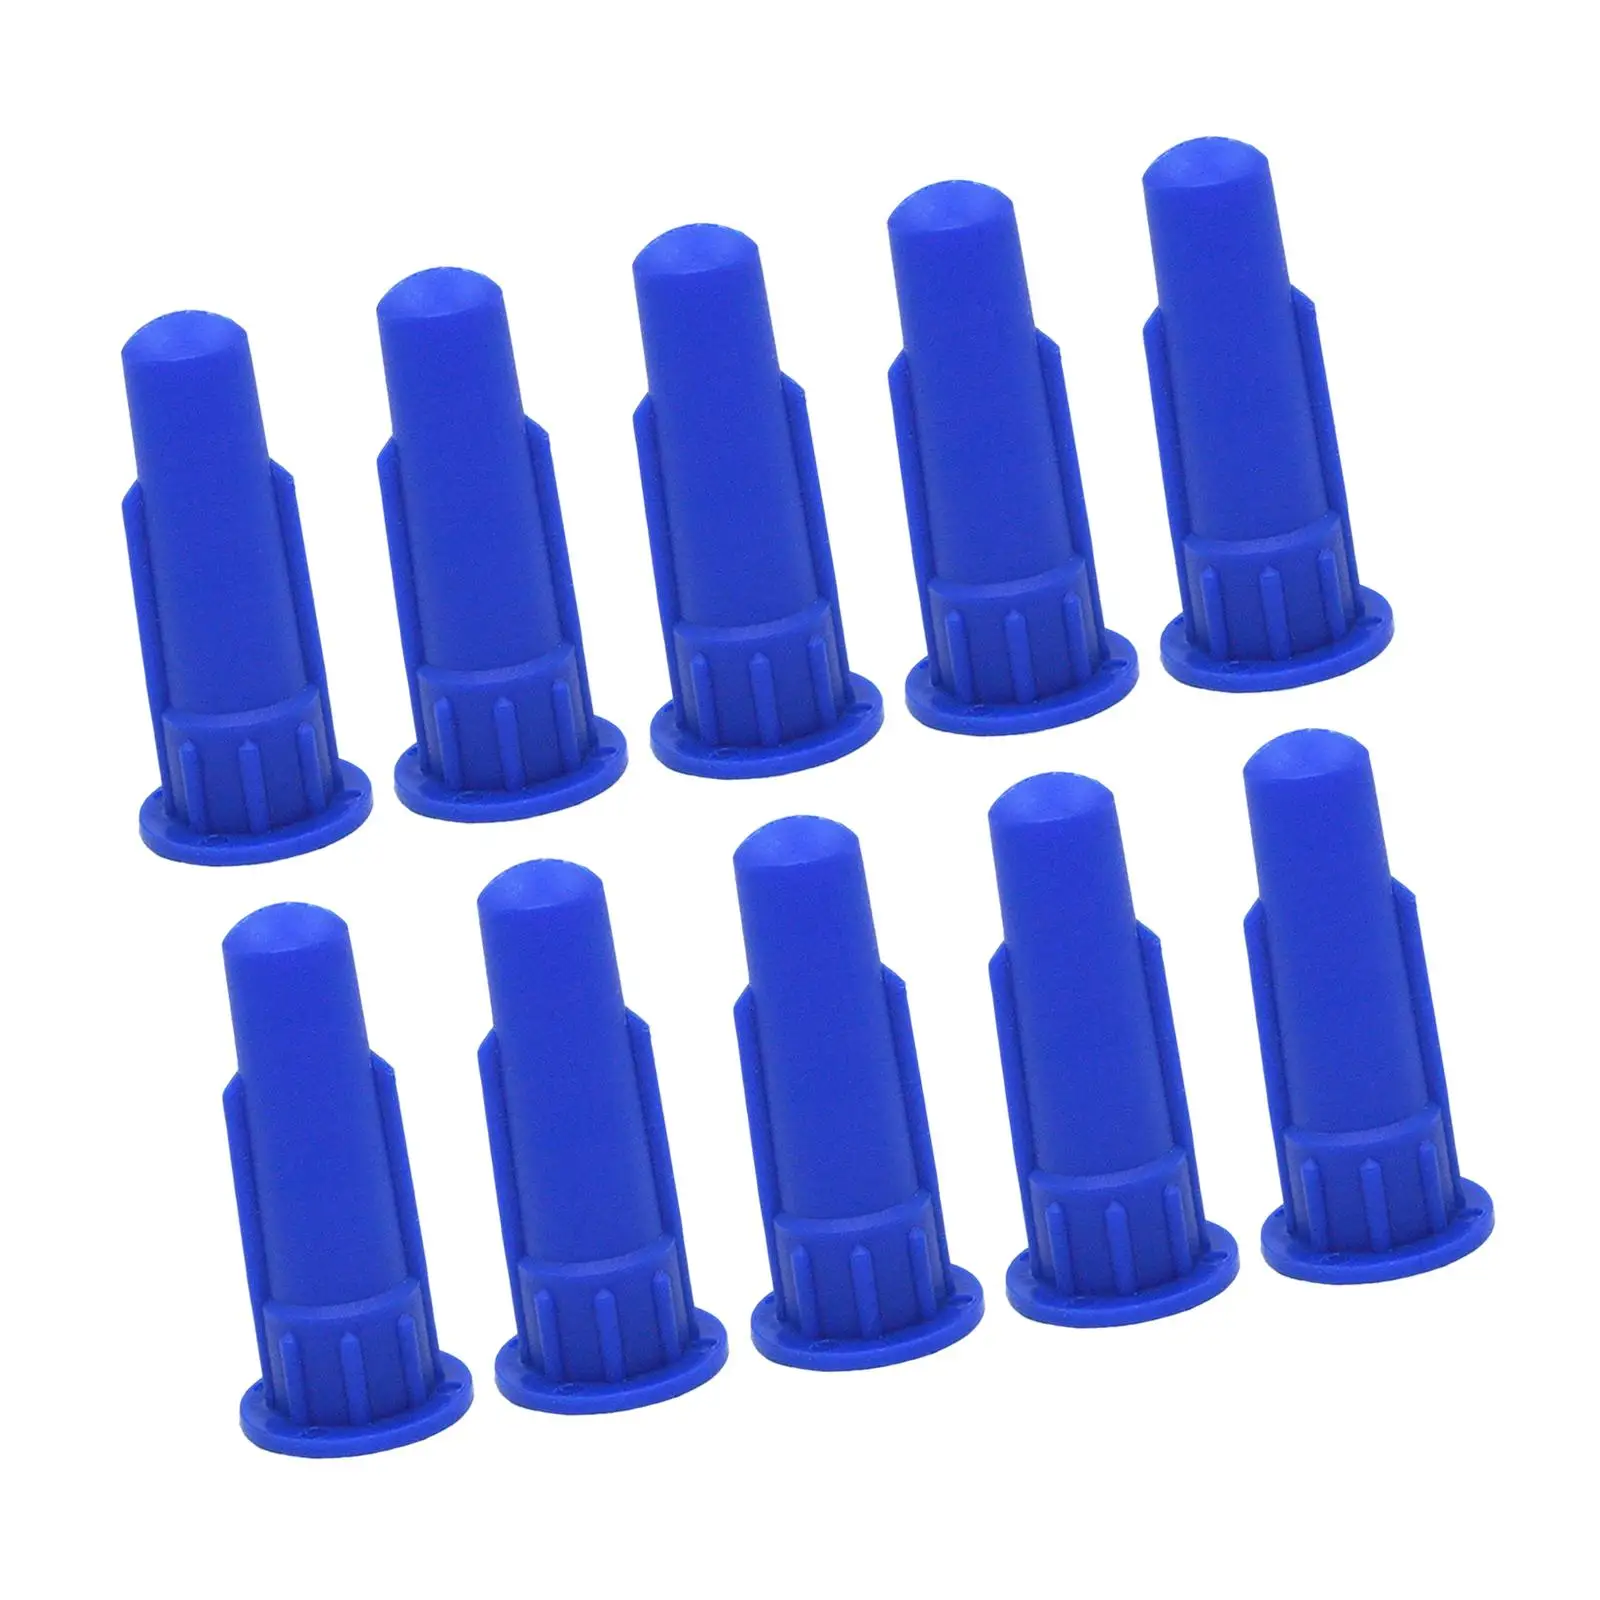 10x Cylindrical Cone Spray Tip Nozzle Spare Part Accessory Blue Tool Durable for Caulking Sealant Dispenser 